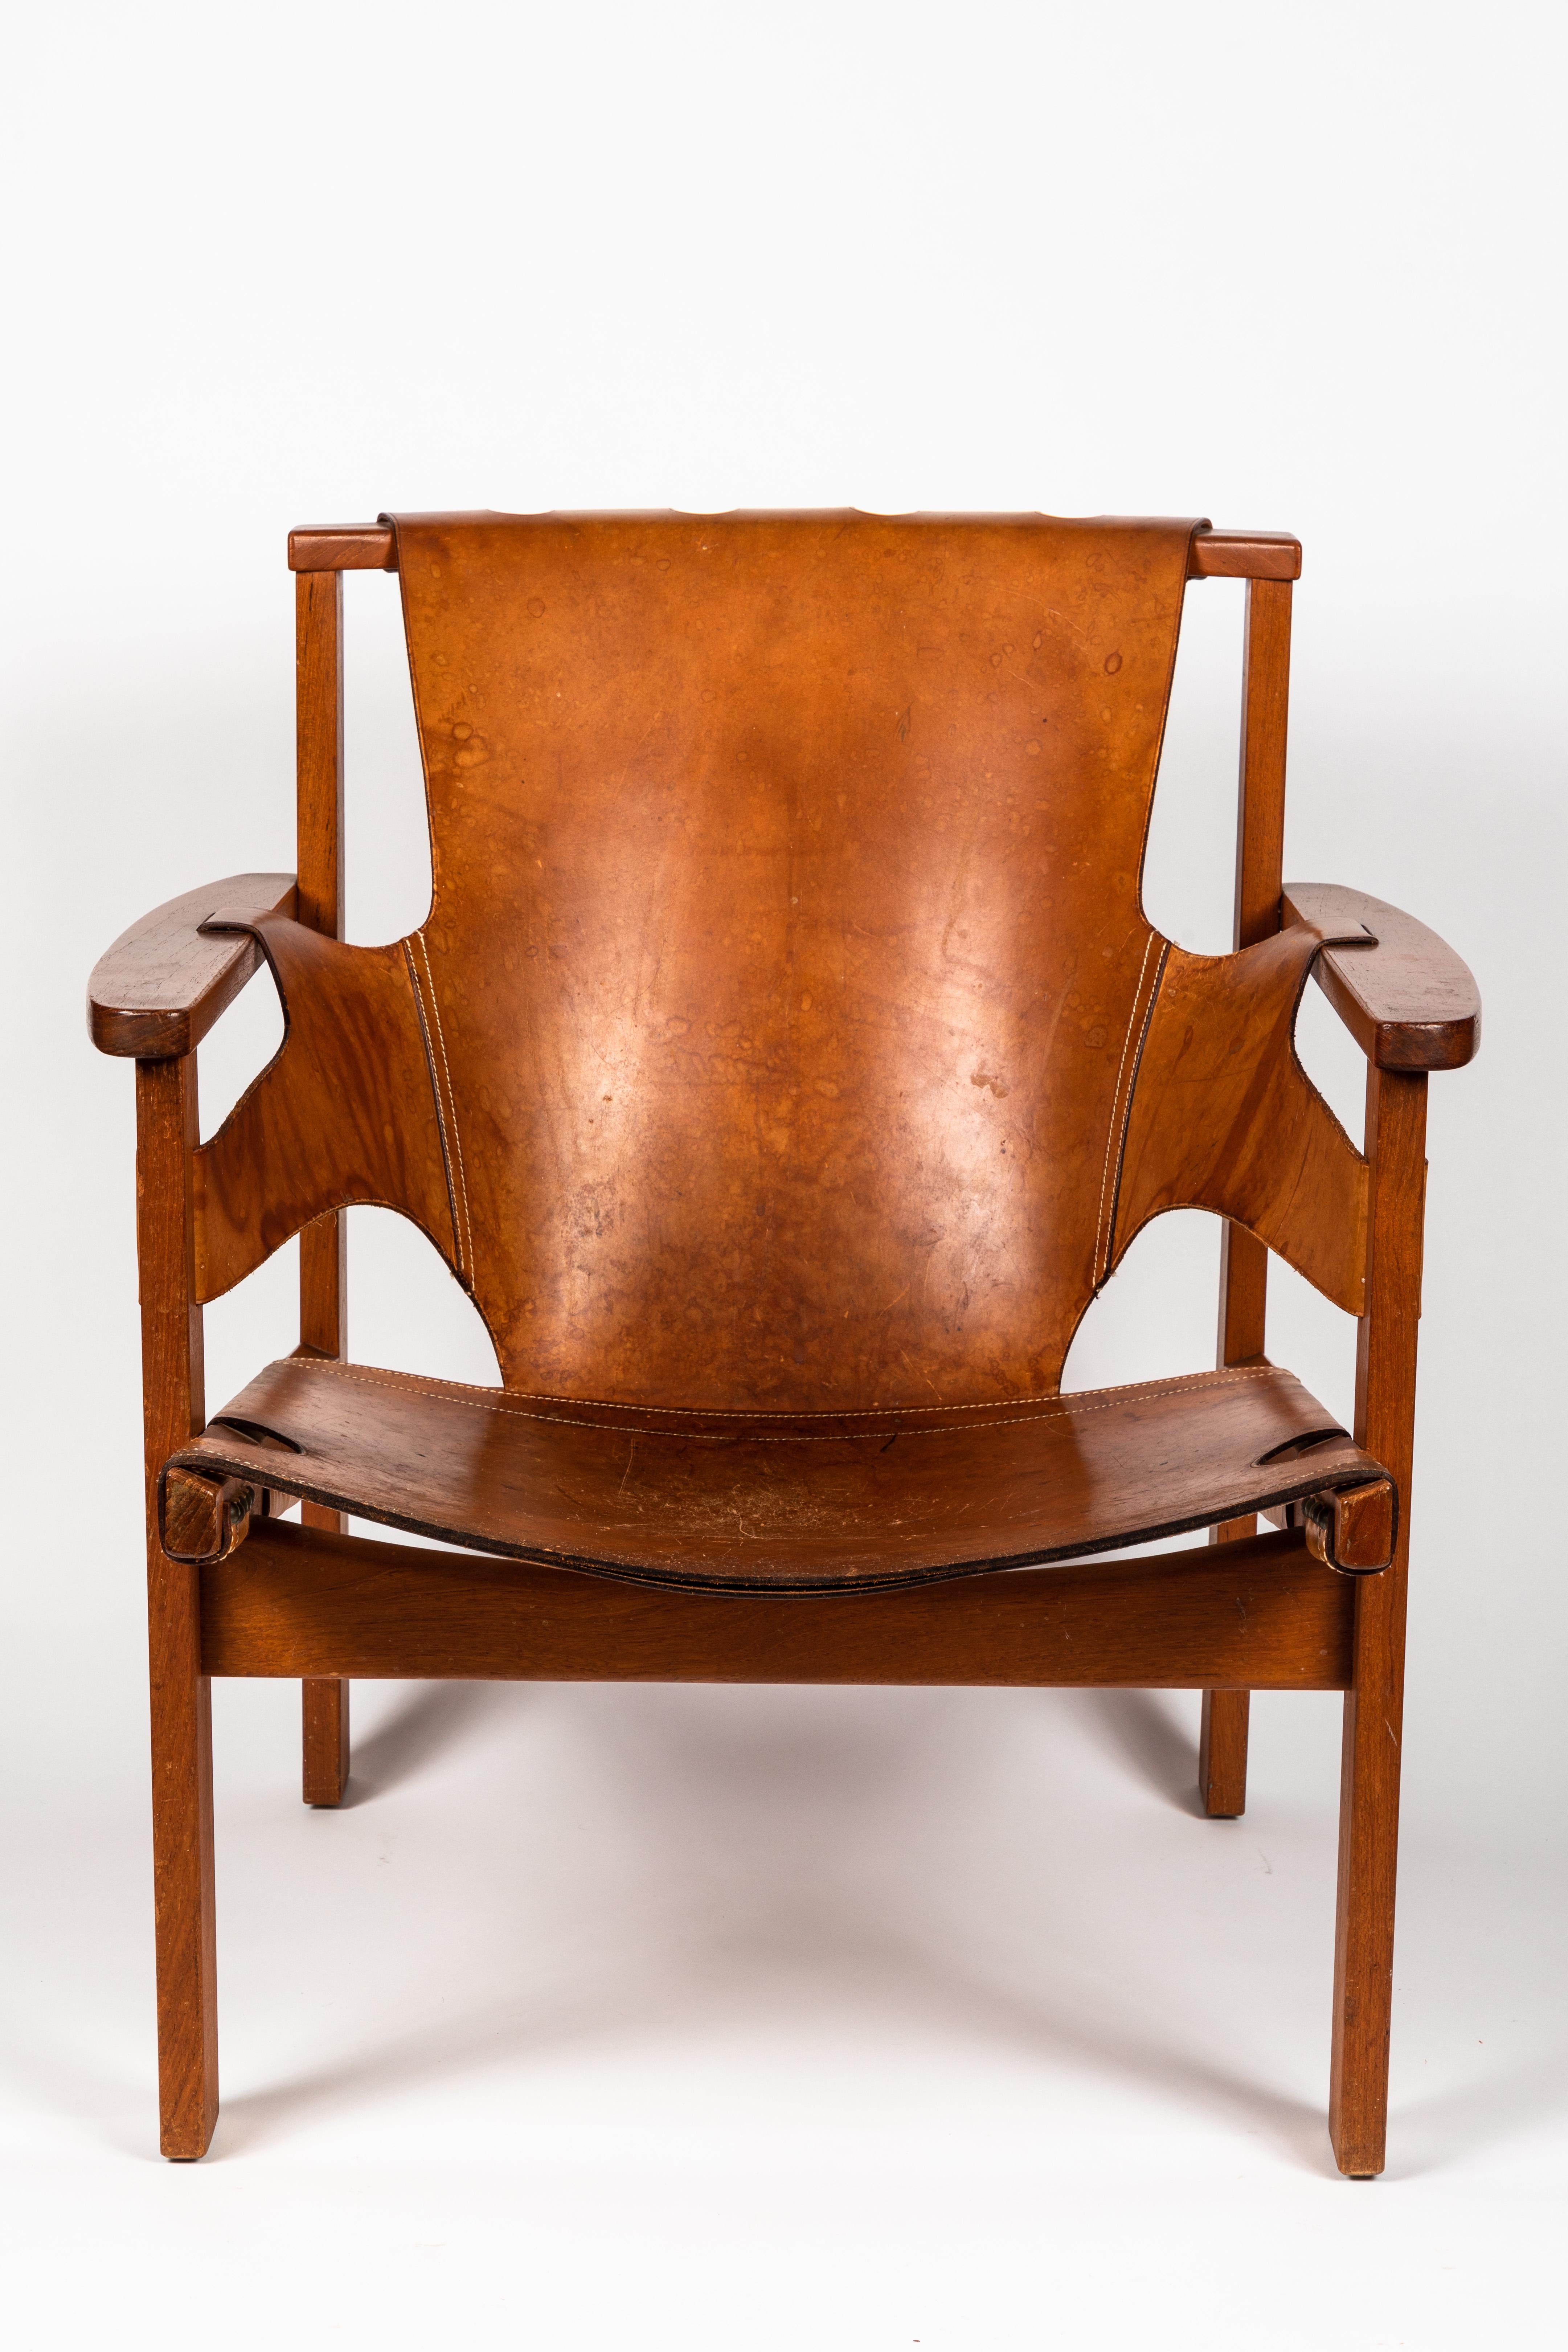 Swedish Carl Axel Acking 'Trienna' Chair in Patinated Brown Leather, circa 1957